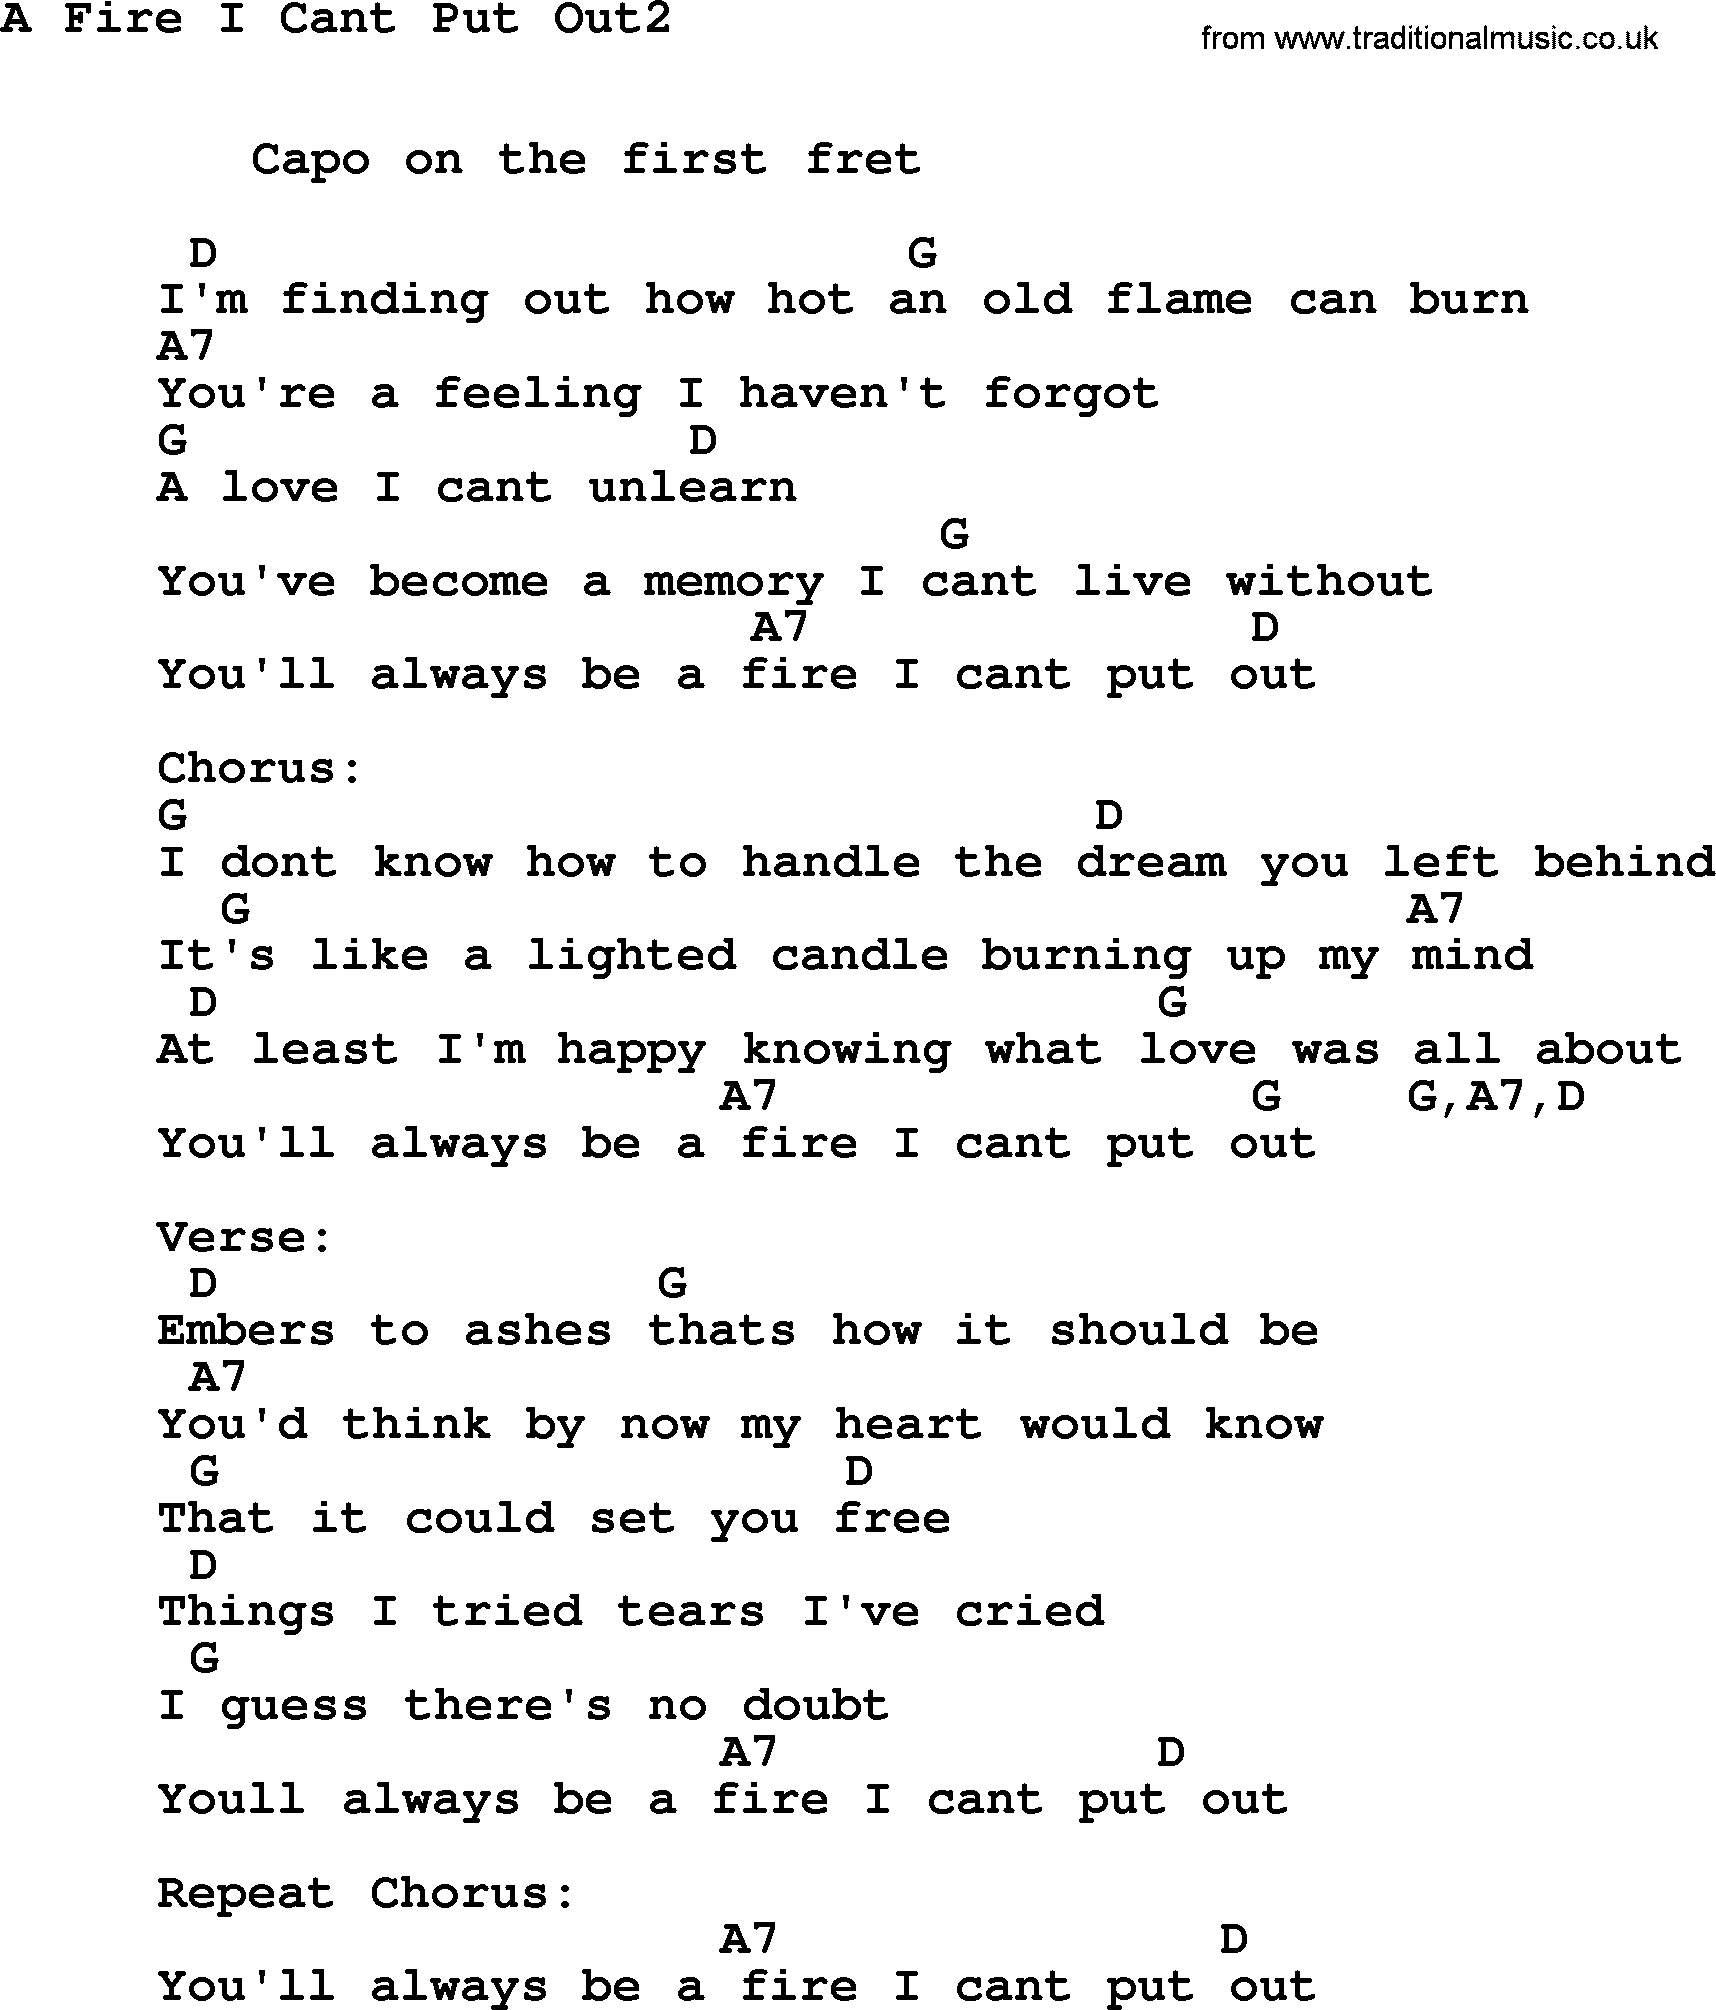 George Strait song: A Fire I Cant Put Out2, lyrics and chords